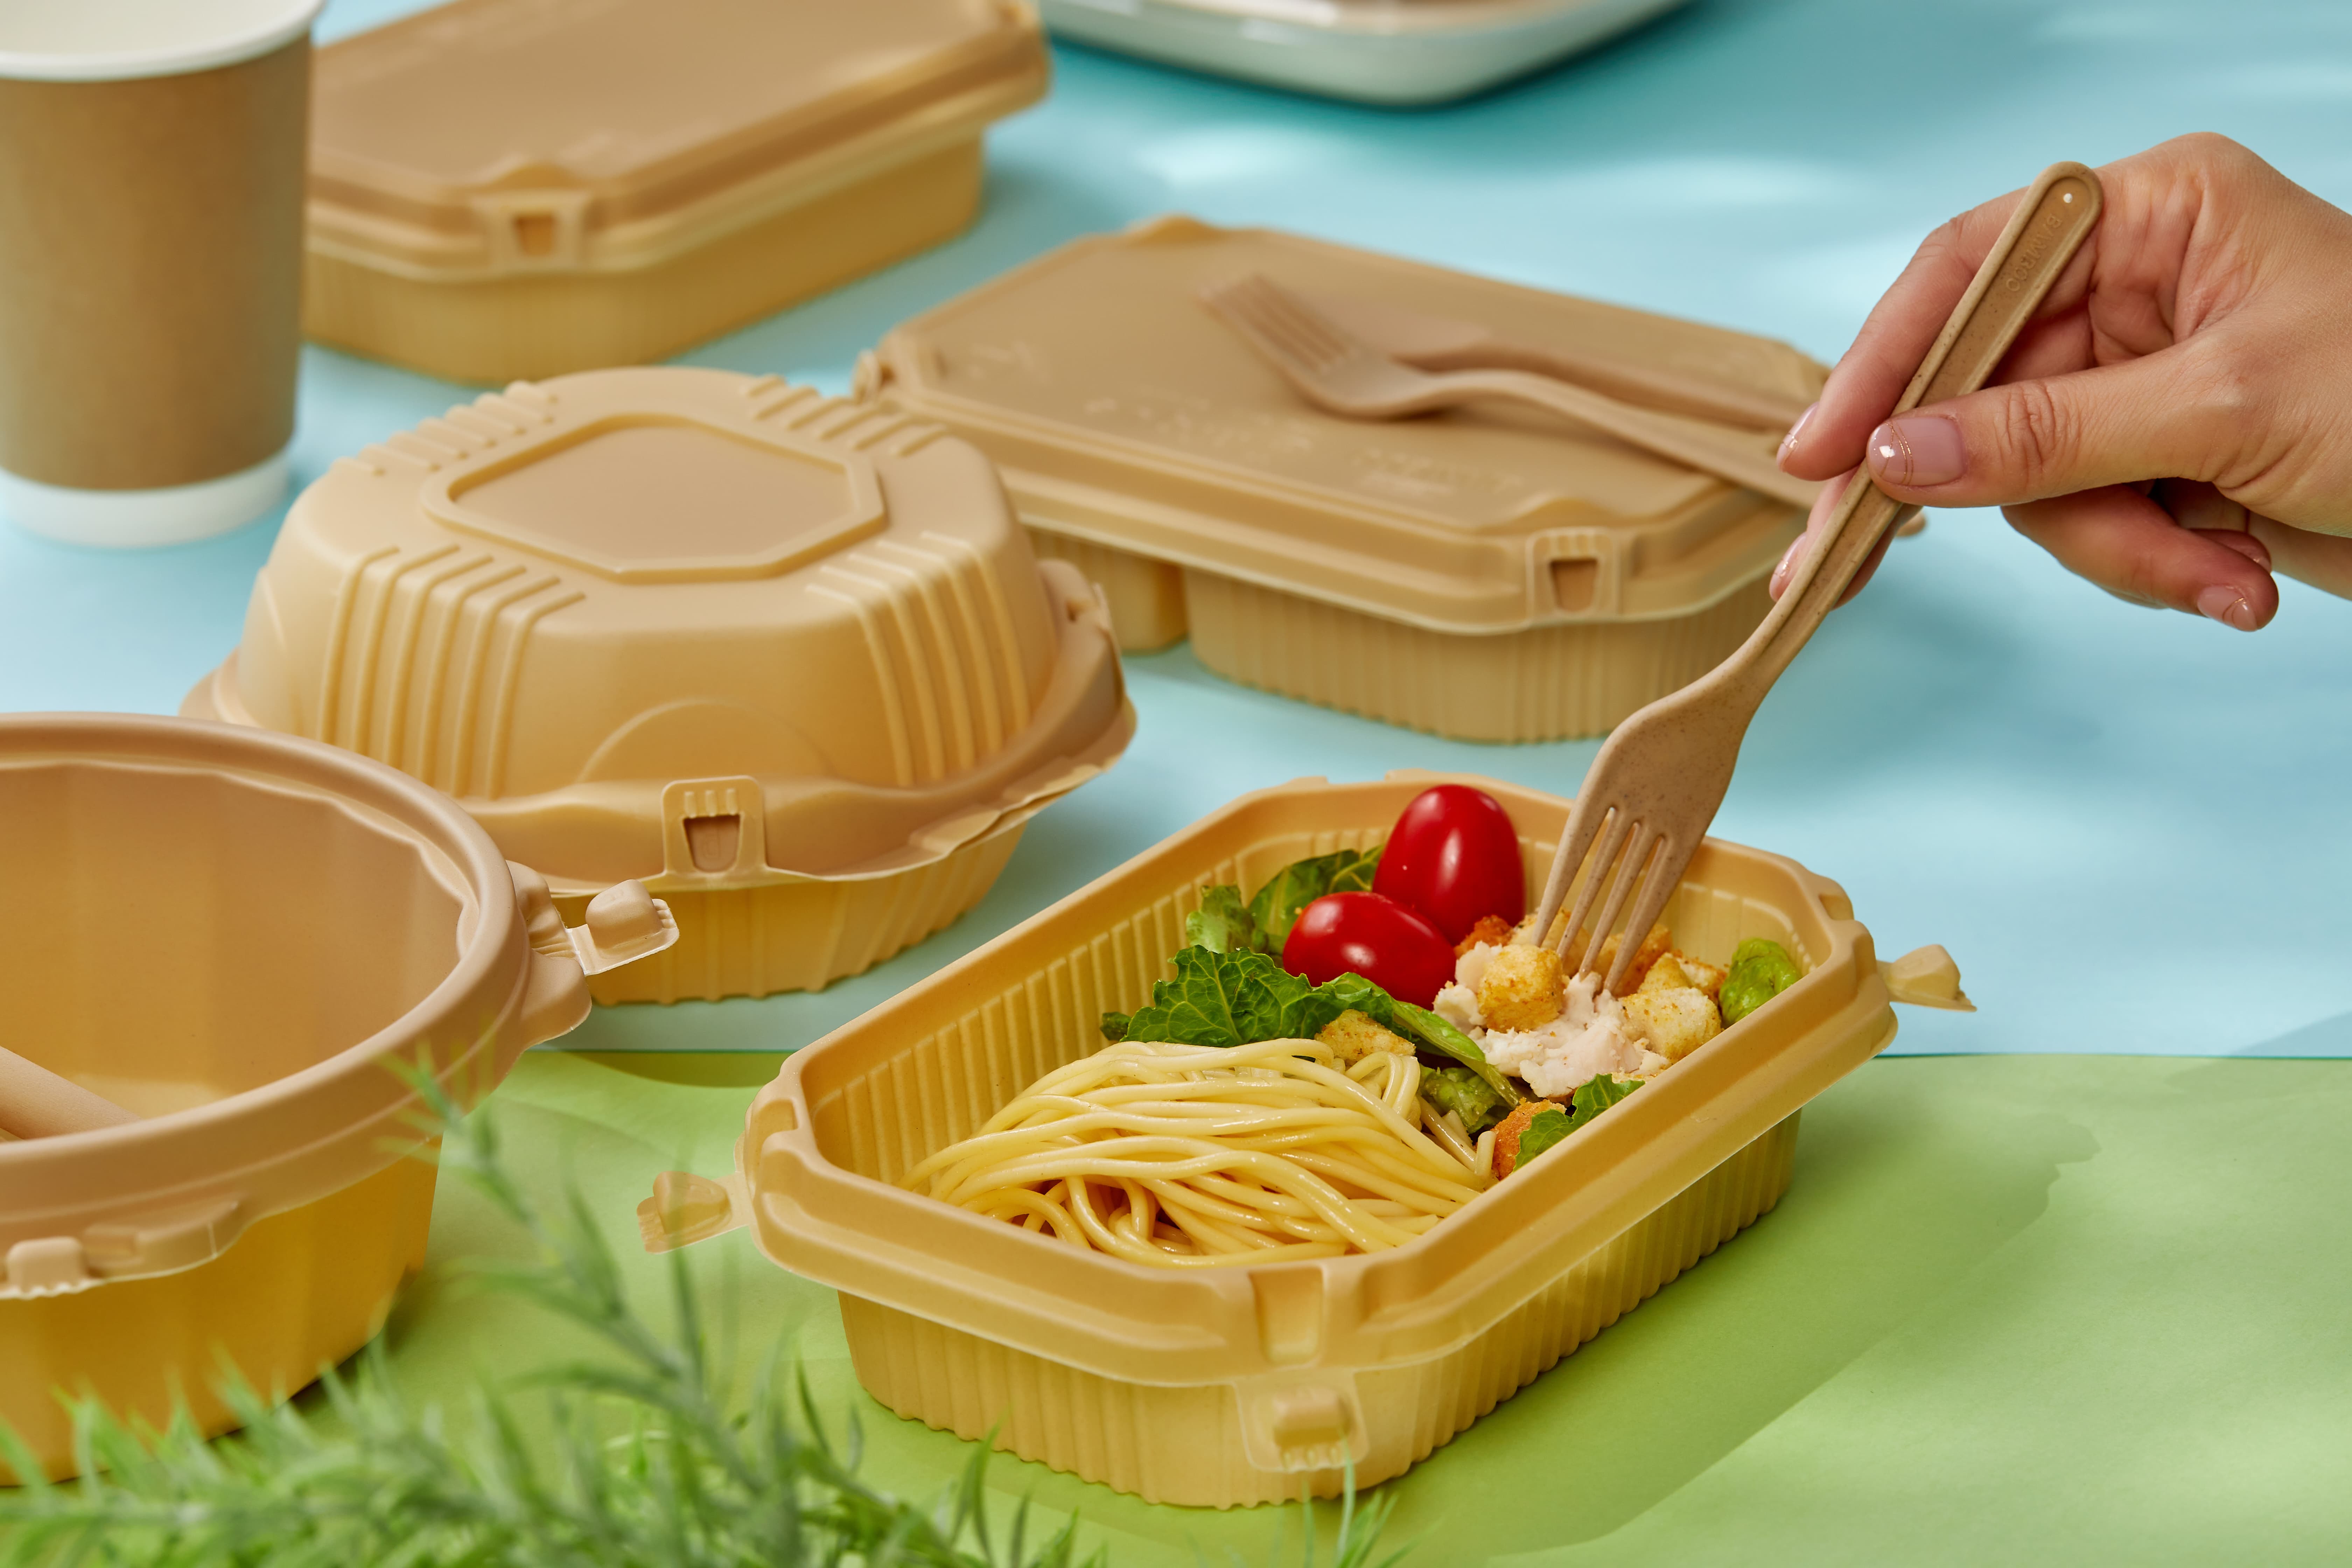 BAMBOO™ Biodegradable Food Products